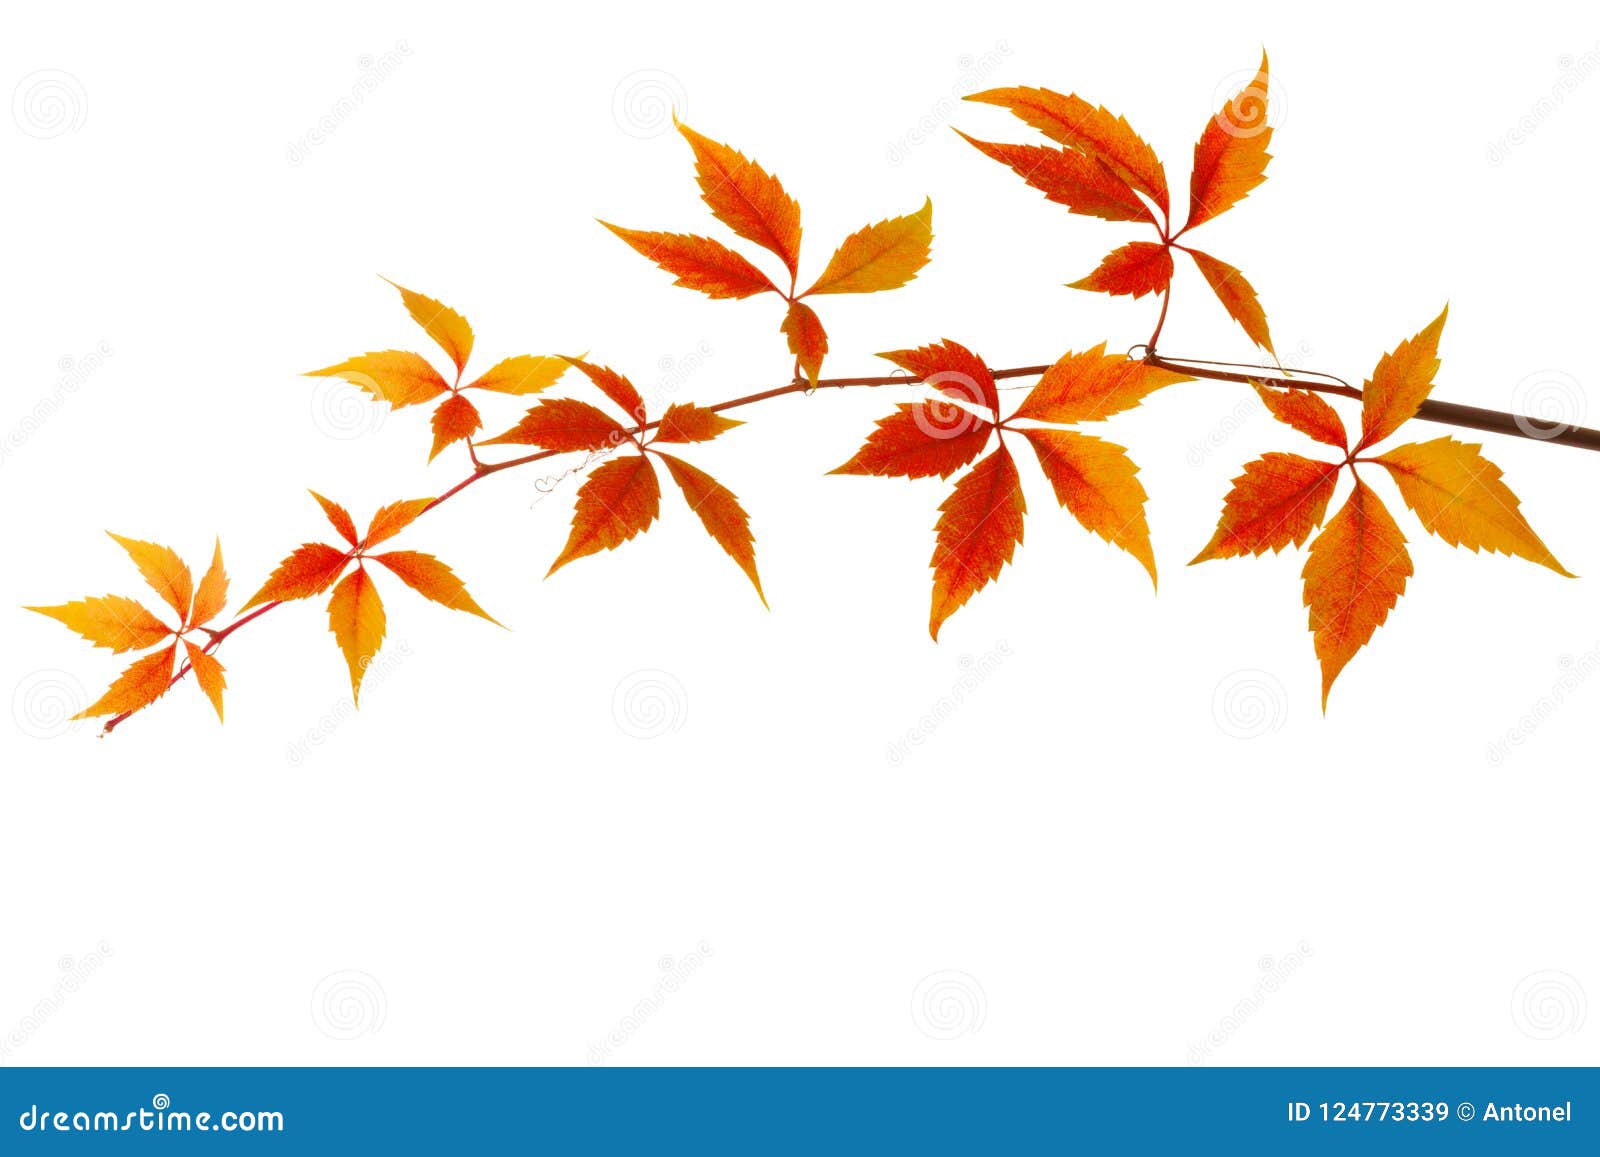 branch of colorful autumn leaves  on a white background. virginia creeper